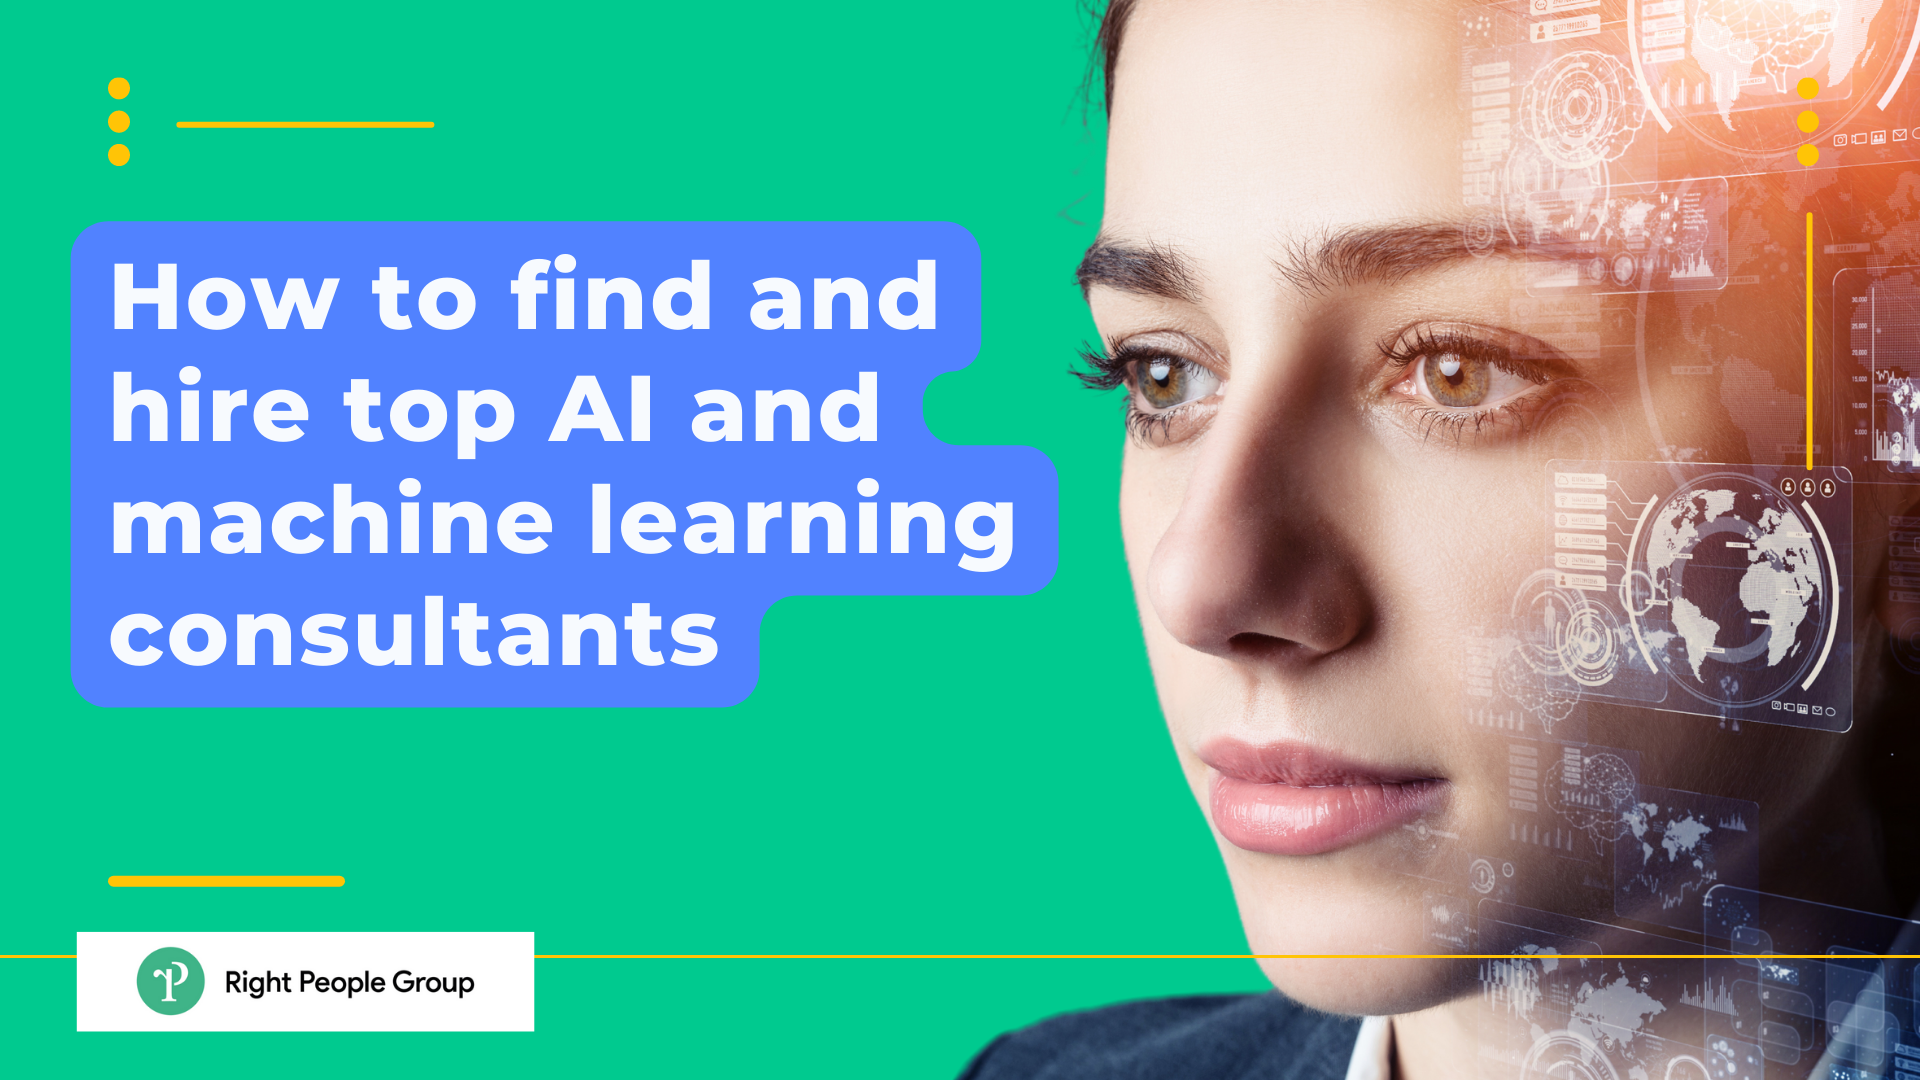 How to find and hire top AI and machine learning consultants